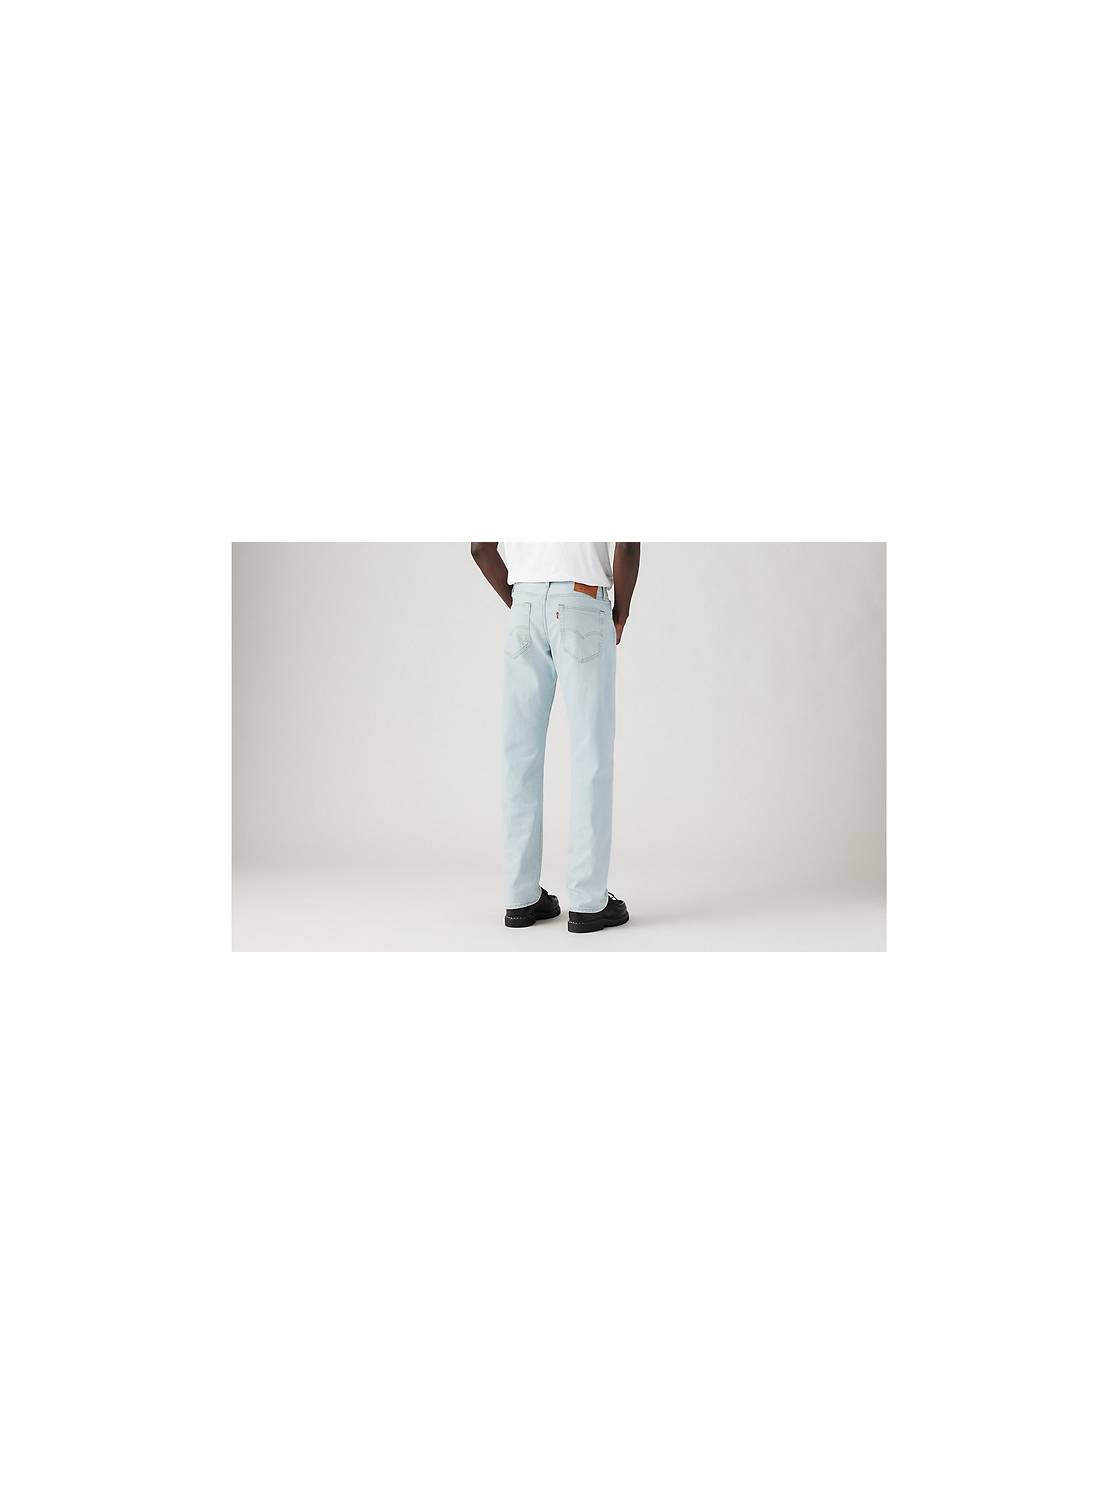  AYBAY Men's Jeans Men Ripped Frayed Cut Out Jeans Men's Jeans  (Color : Light Wash, Size : Small) : Clothing, Shoes & Jewelry